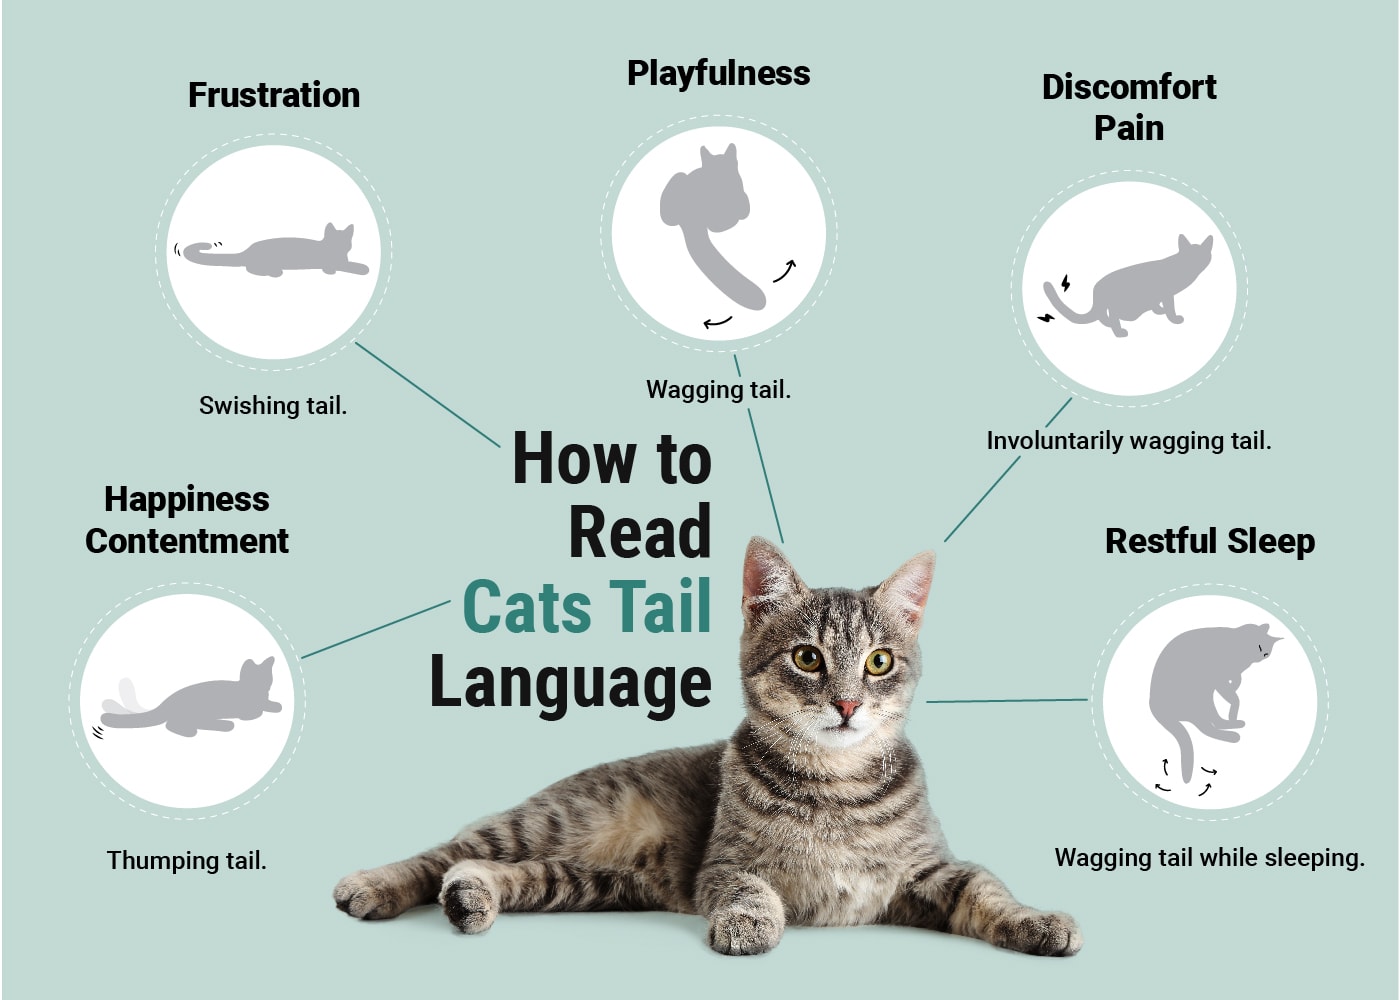 How to Read Cats Tail Language